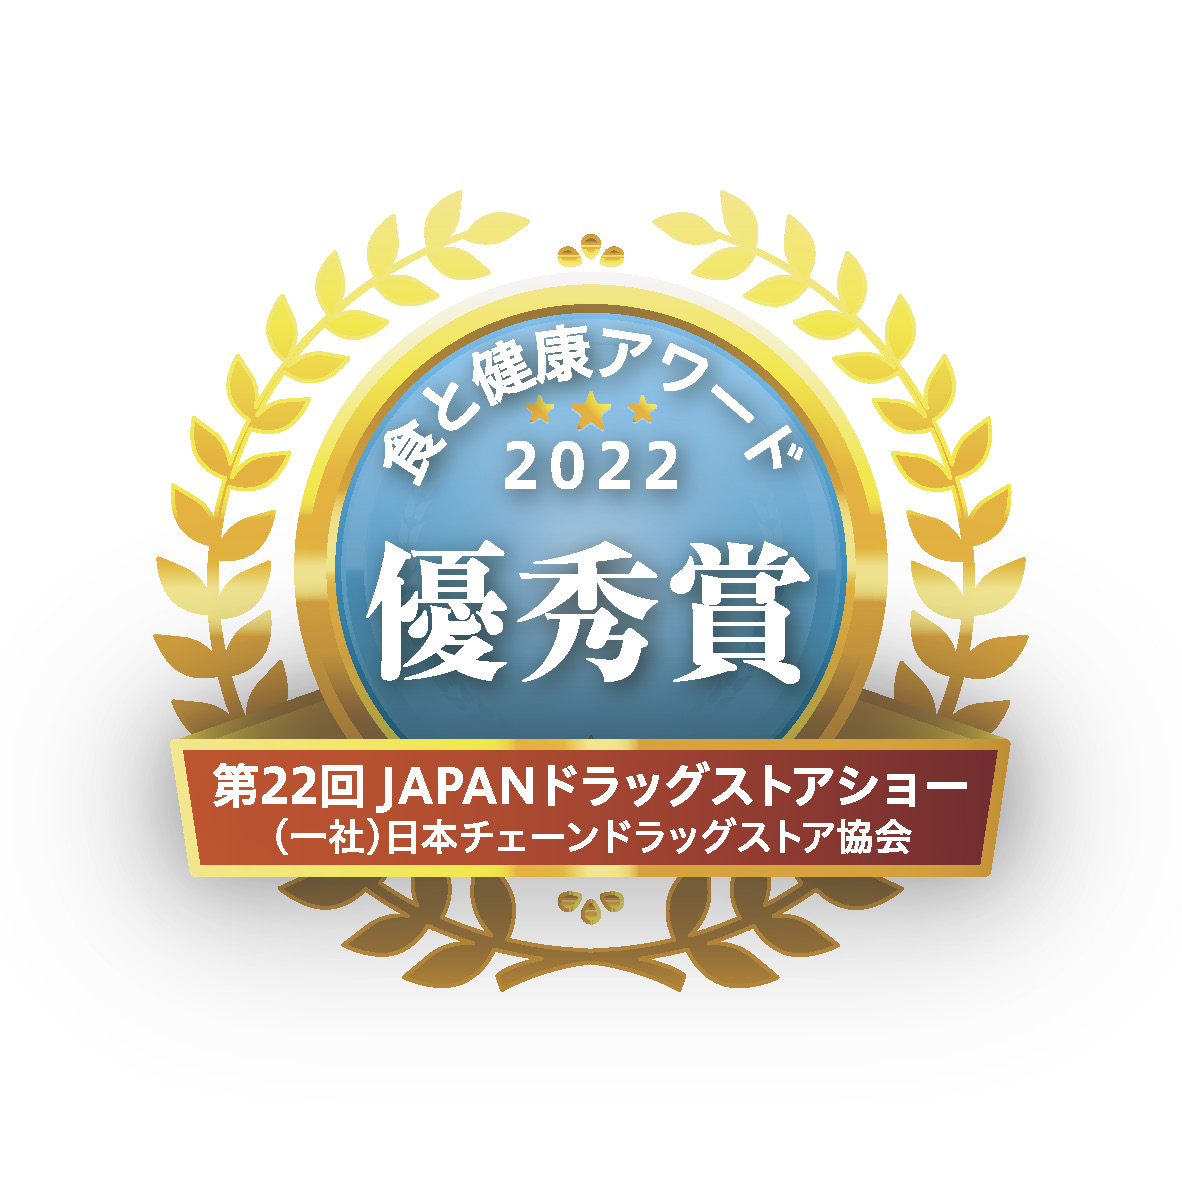 TSC healthy instant cereal product won the Outstanding Award in the 2022 Food and Health Award which was organized by Japan Association of Chain Drug